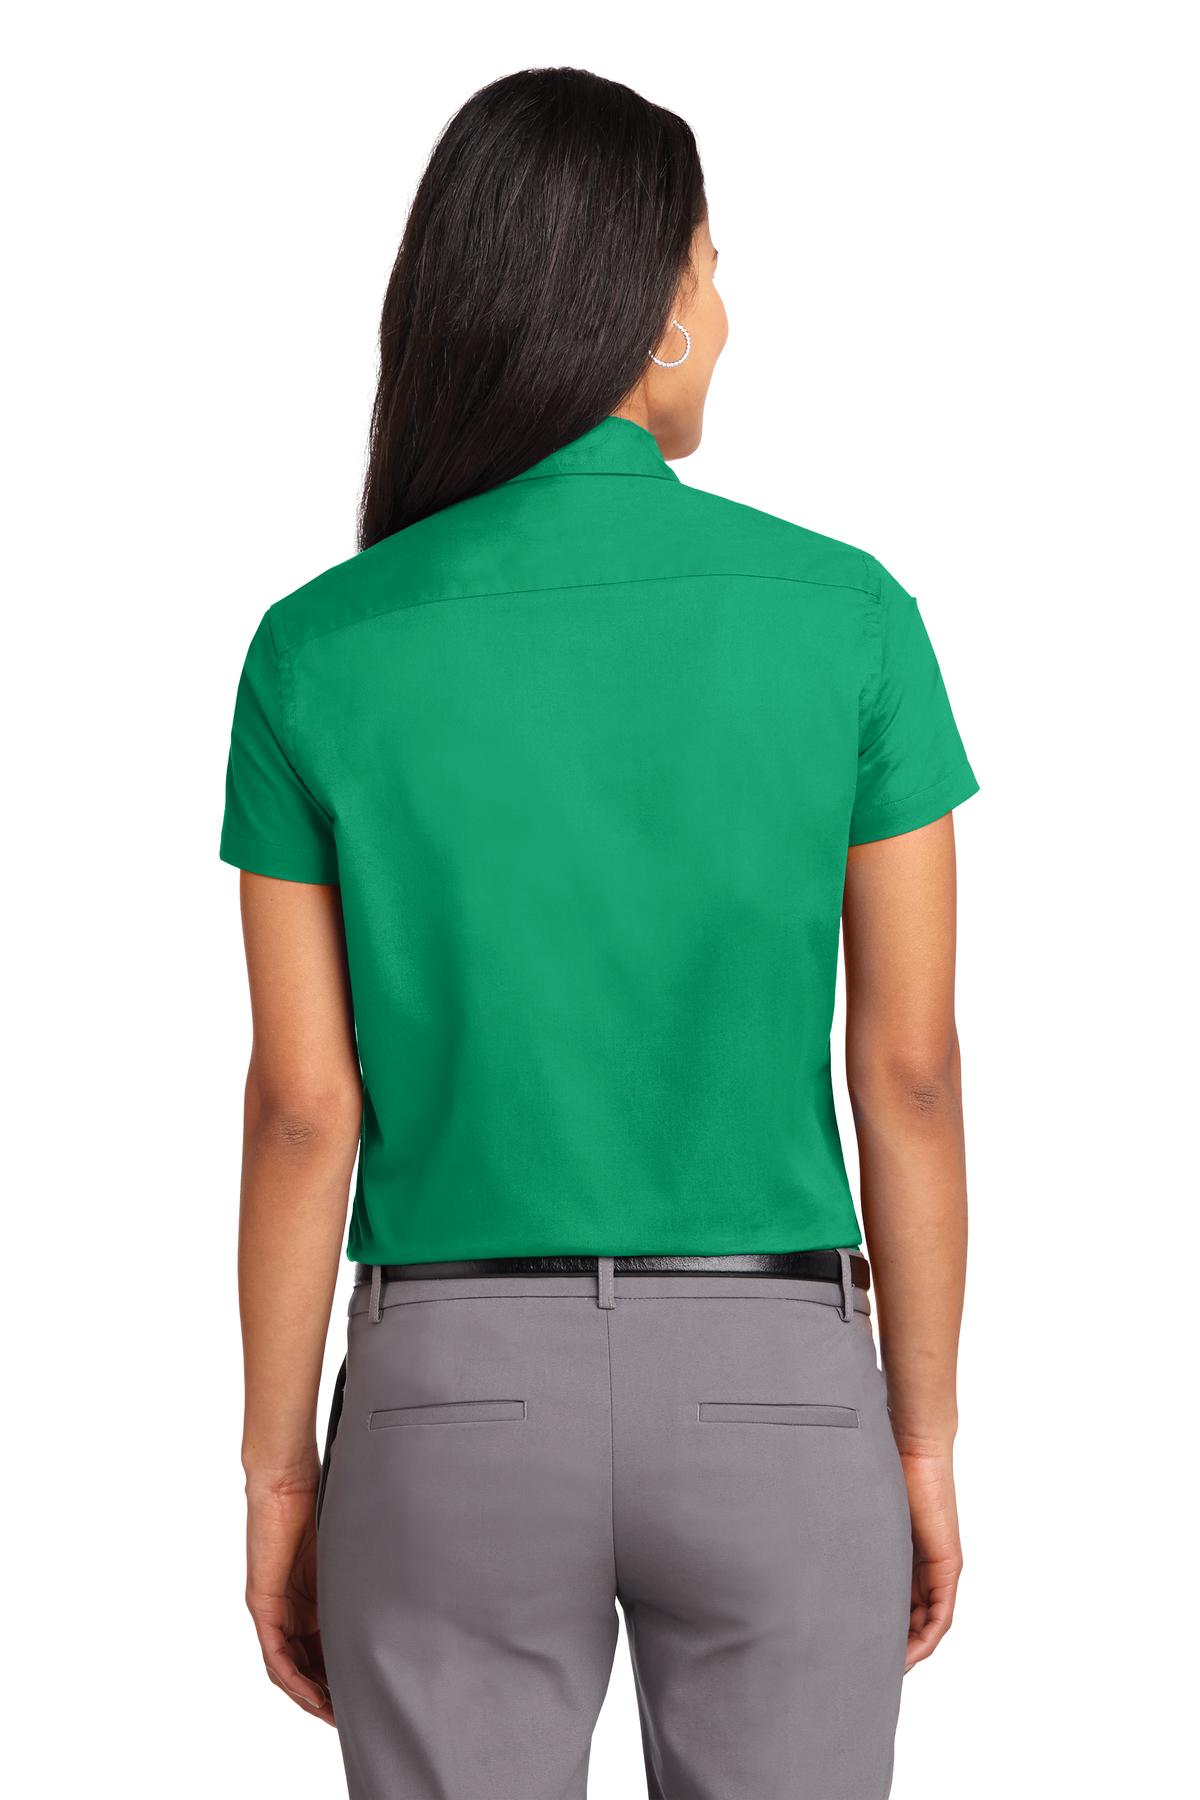 Port Authority® Ladies Short Sleeve Easy Care Shirt. L508 [Court Green] - DFW Impression